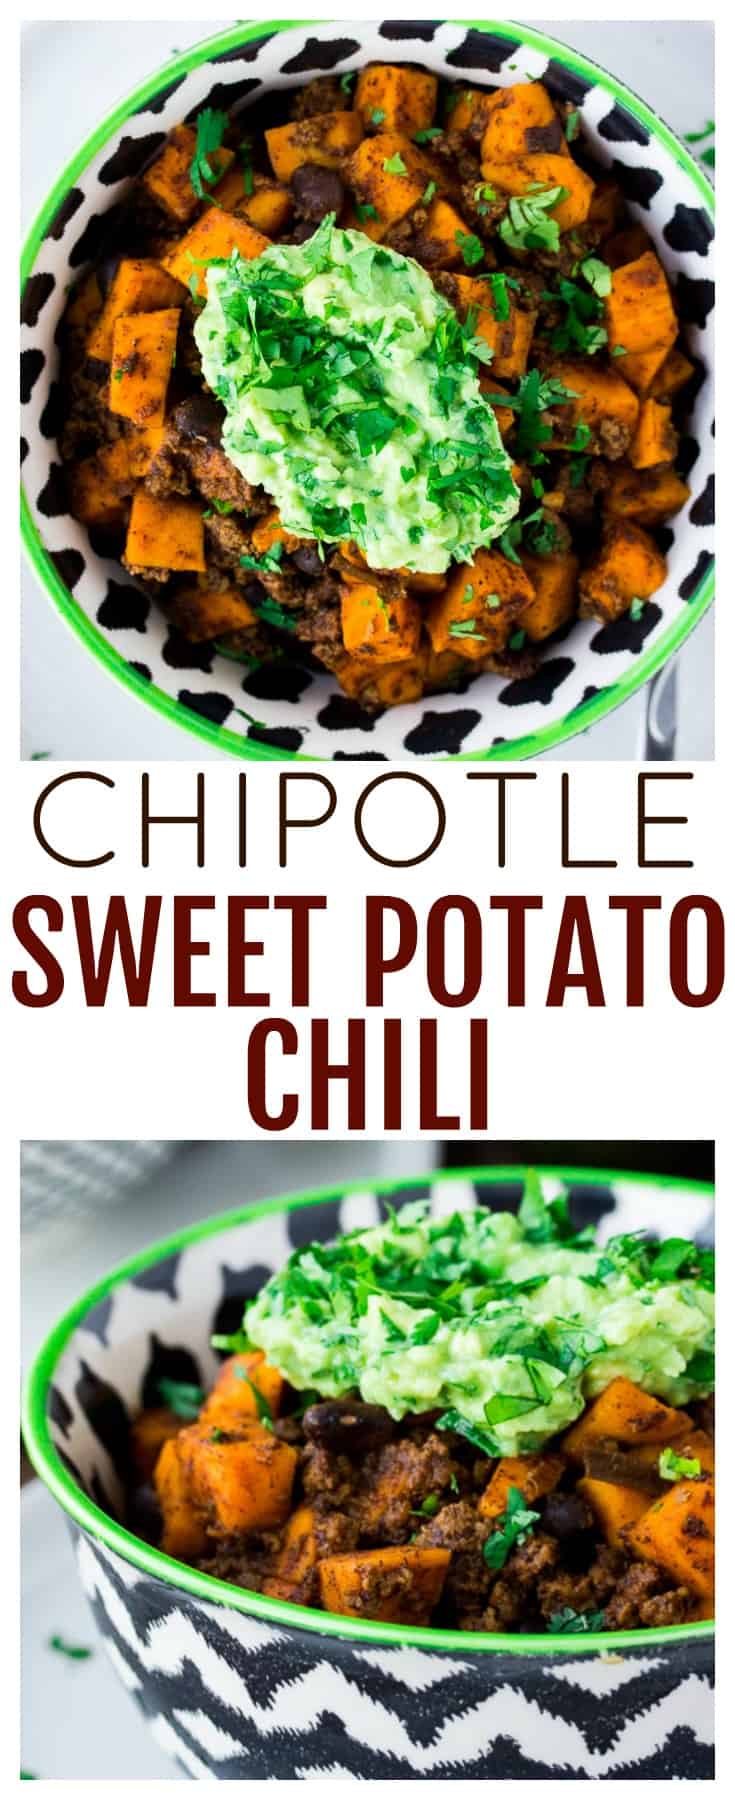 This Chipotle Sweet Potato Chili recipe with added beef and black beans is hearty, sweet, and smoky! Top it with a simple Cilantro Lime Avocado Smash for a bit of cool zest in every bite! | #dlbrecipes #chili #sweetpotatochili #chipotlechili #chilirecipe